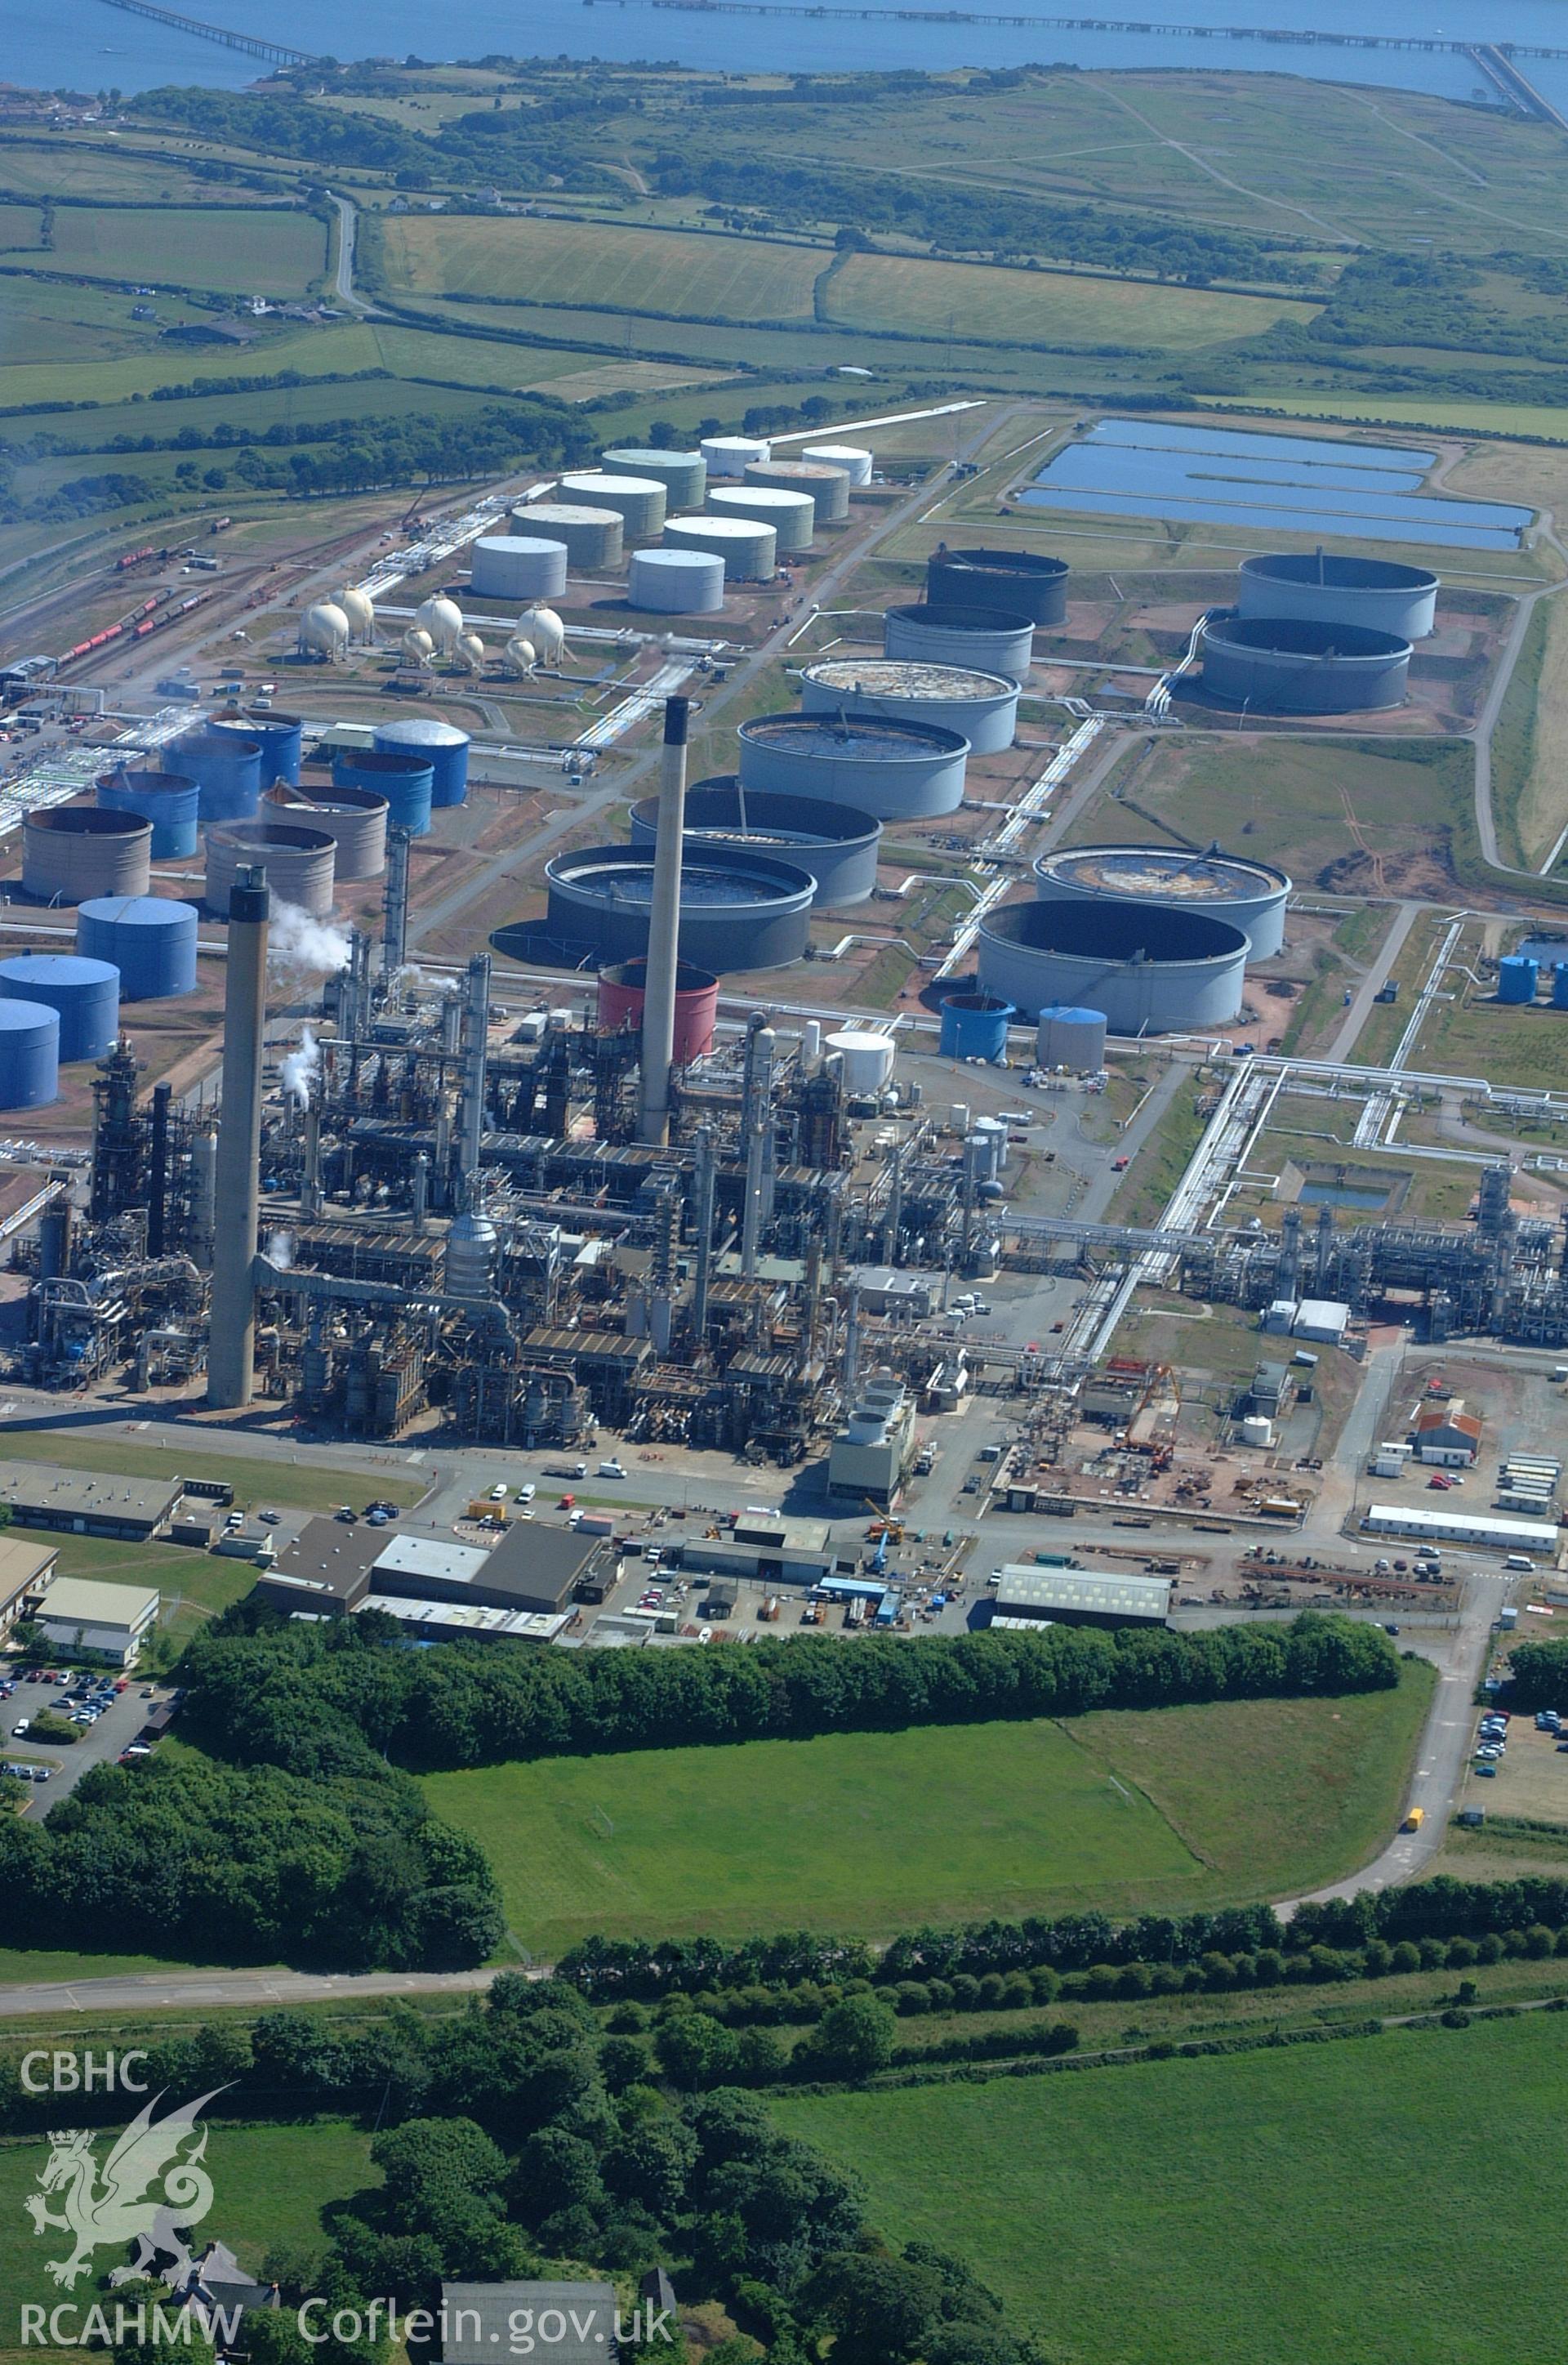 RCAHMW colour oblique aerial photograph of Amoco Oil Refinery, Milford Haven taken on 15/06/2004 by Toby Driver